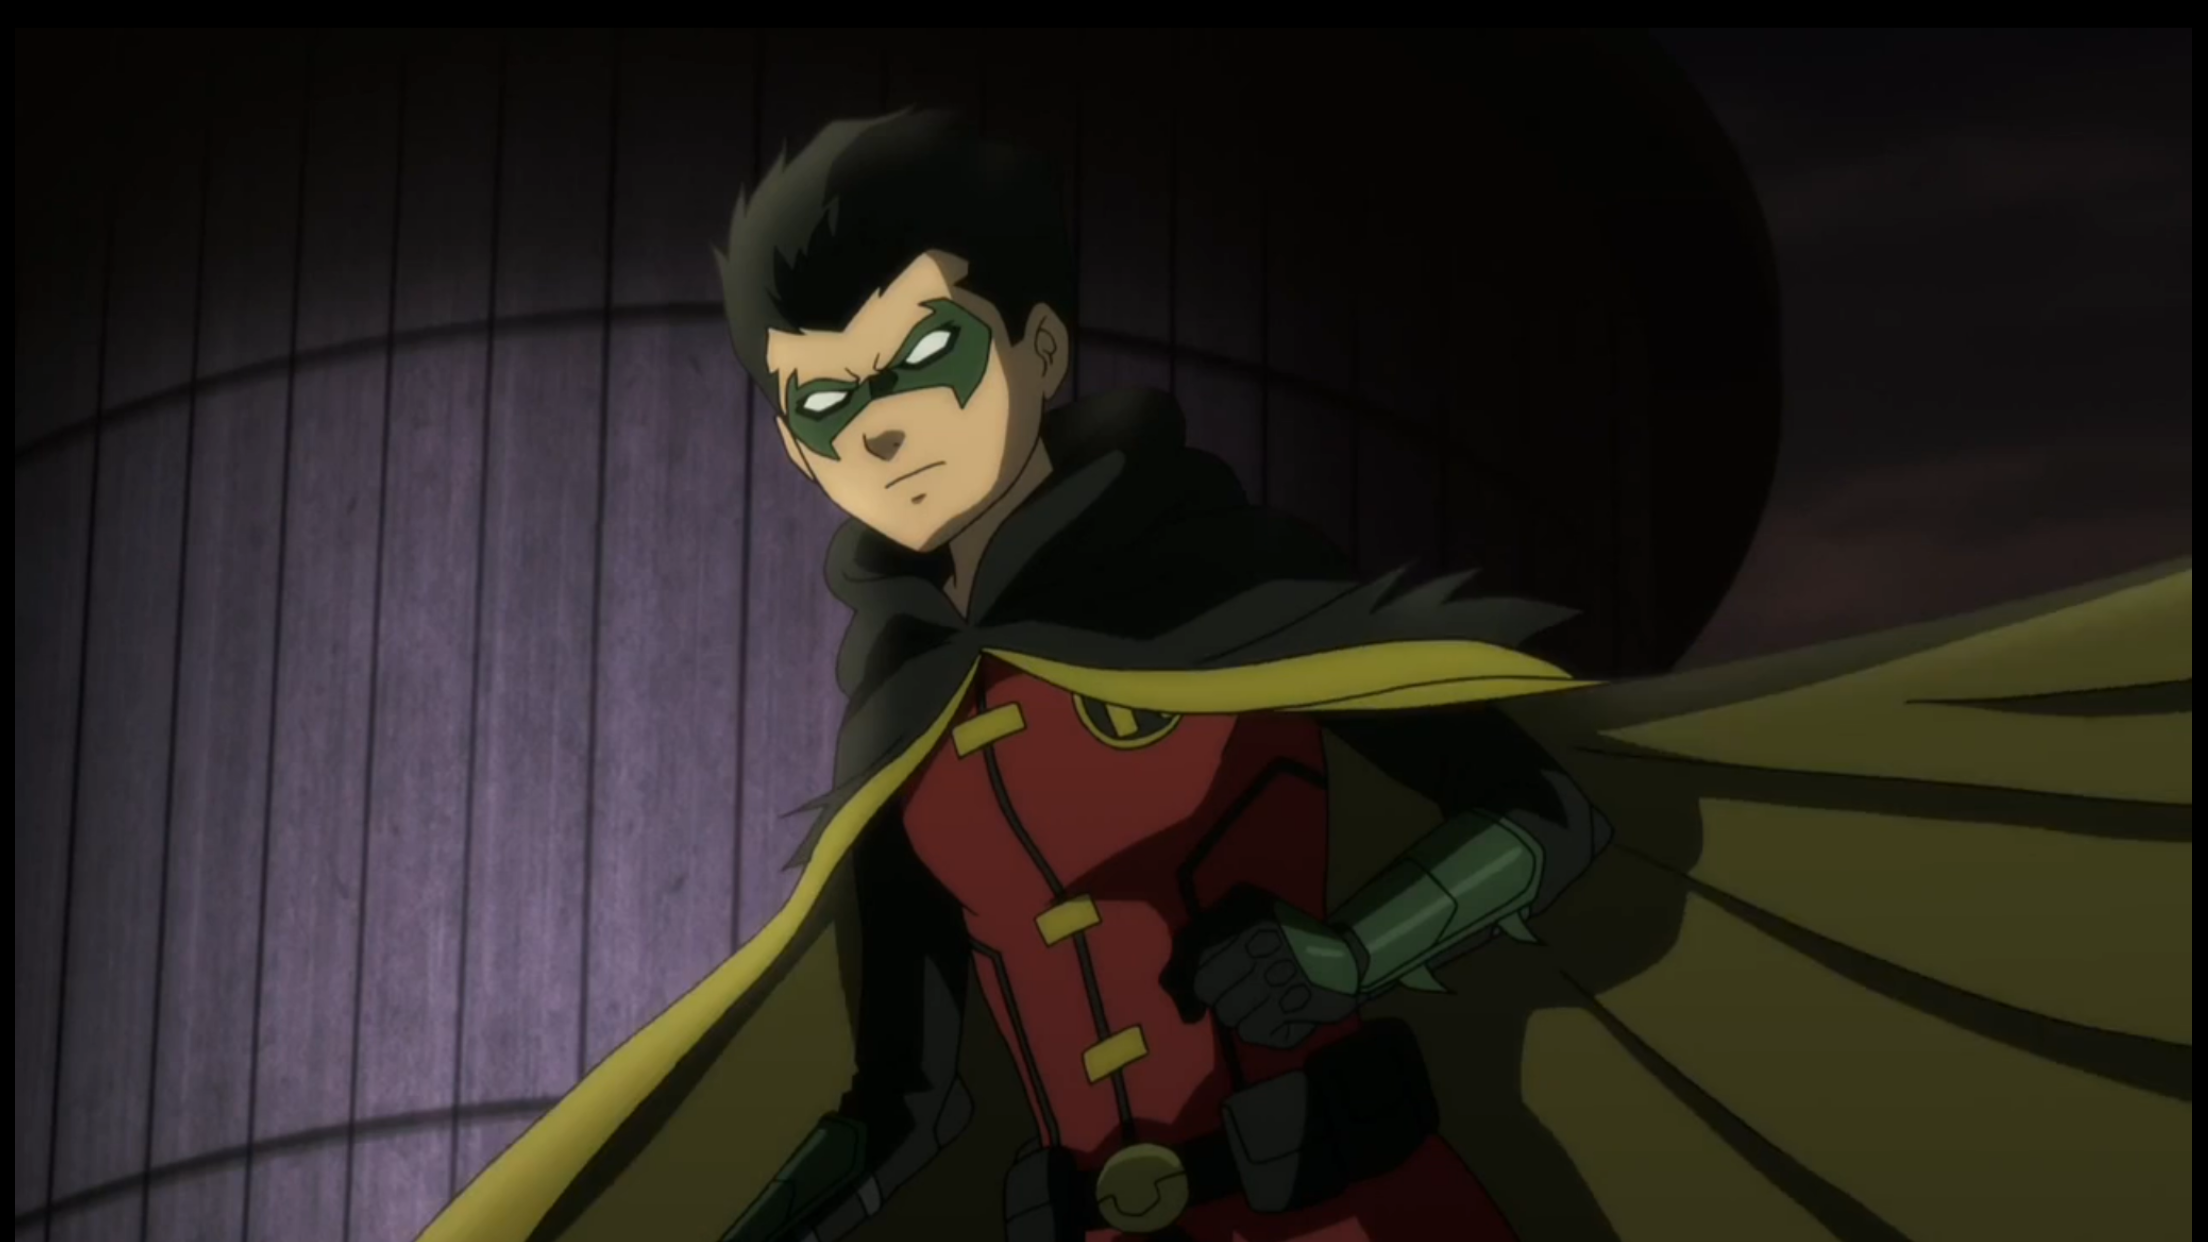 Damian Wayne is a fictional superhero appearing in comic books published by DC Comics, created by Grant Morrison and Andy Kubert, commonly in associat...